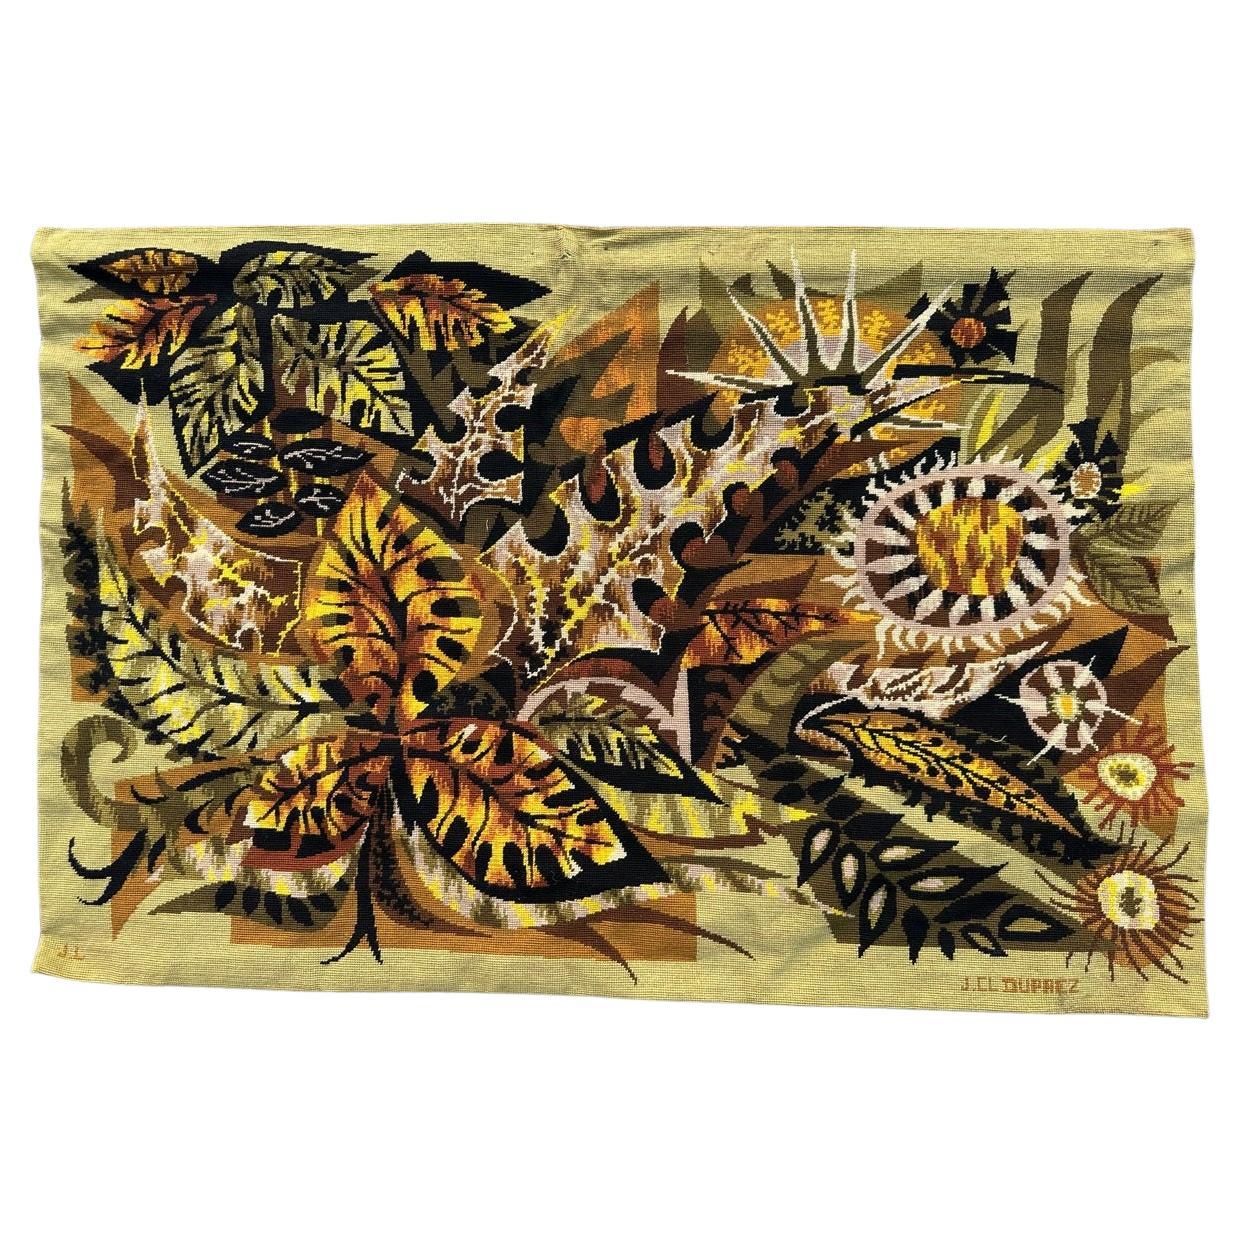 Bobyrug’s Pretty vintage french modern design tapestry by Jean Claude Duprez For Sale